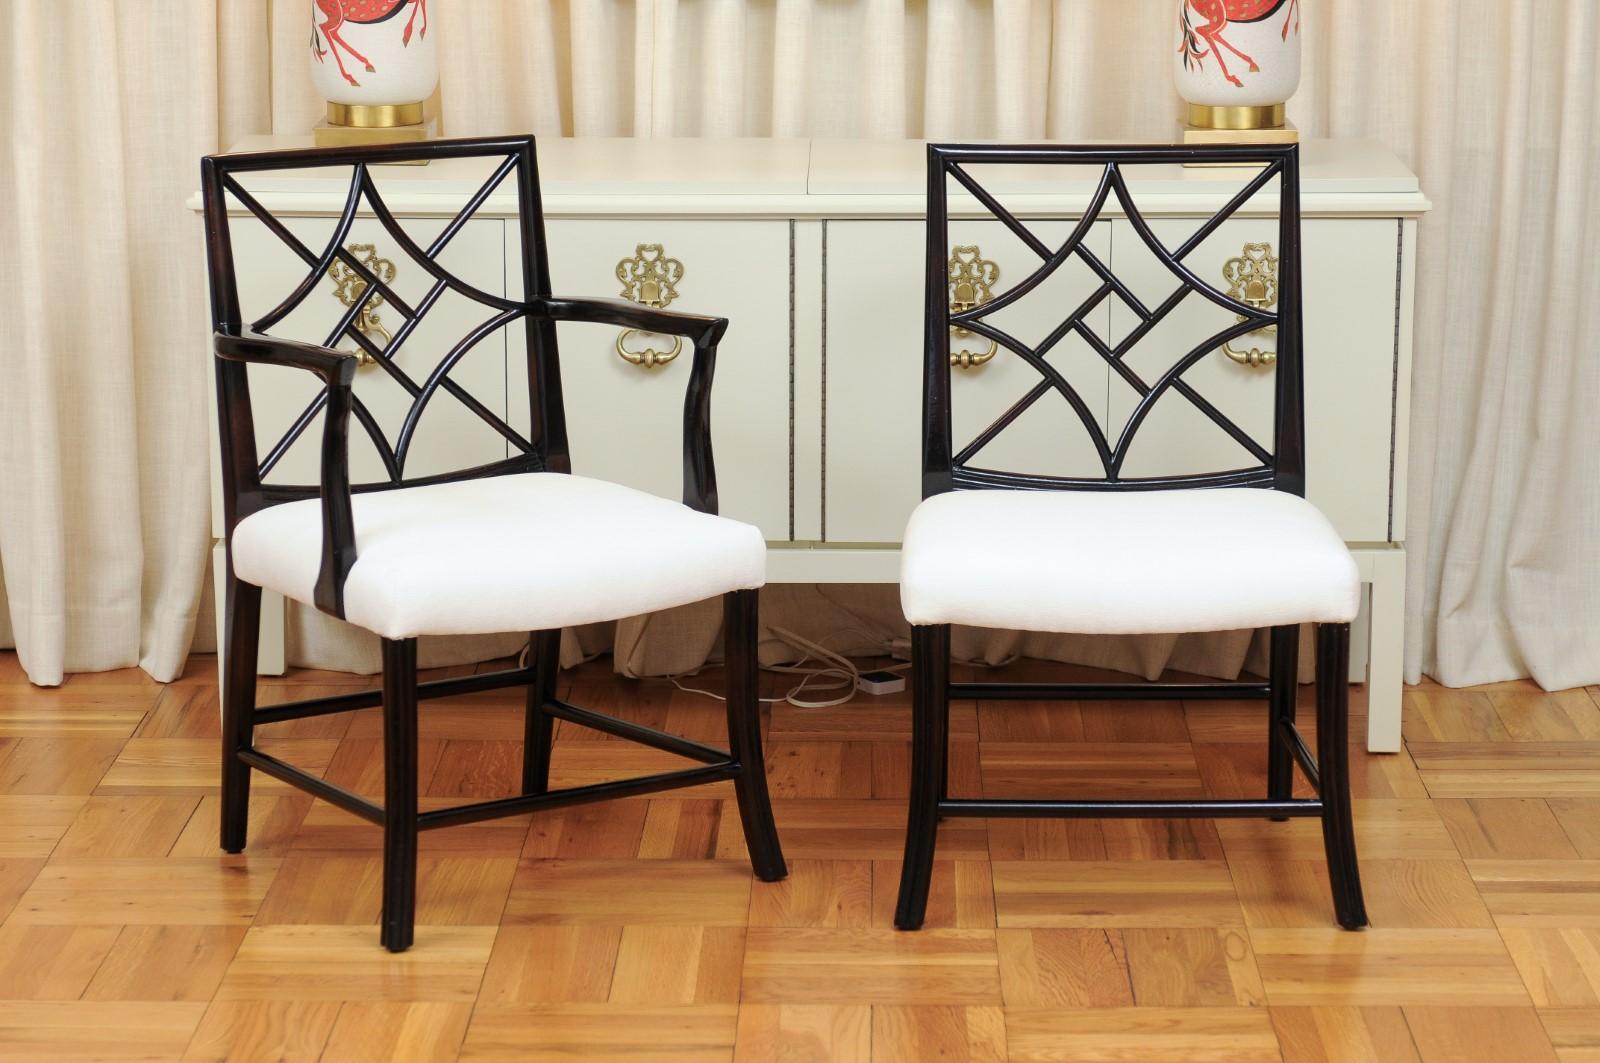 This magnificent unique set of dining chairs is shipped as professionally photographed and described in the listing narrative: Meticulously professionally restored, newly upholstered and completely installation ready. Expert custom upholstery